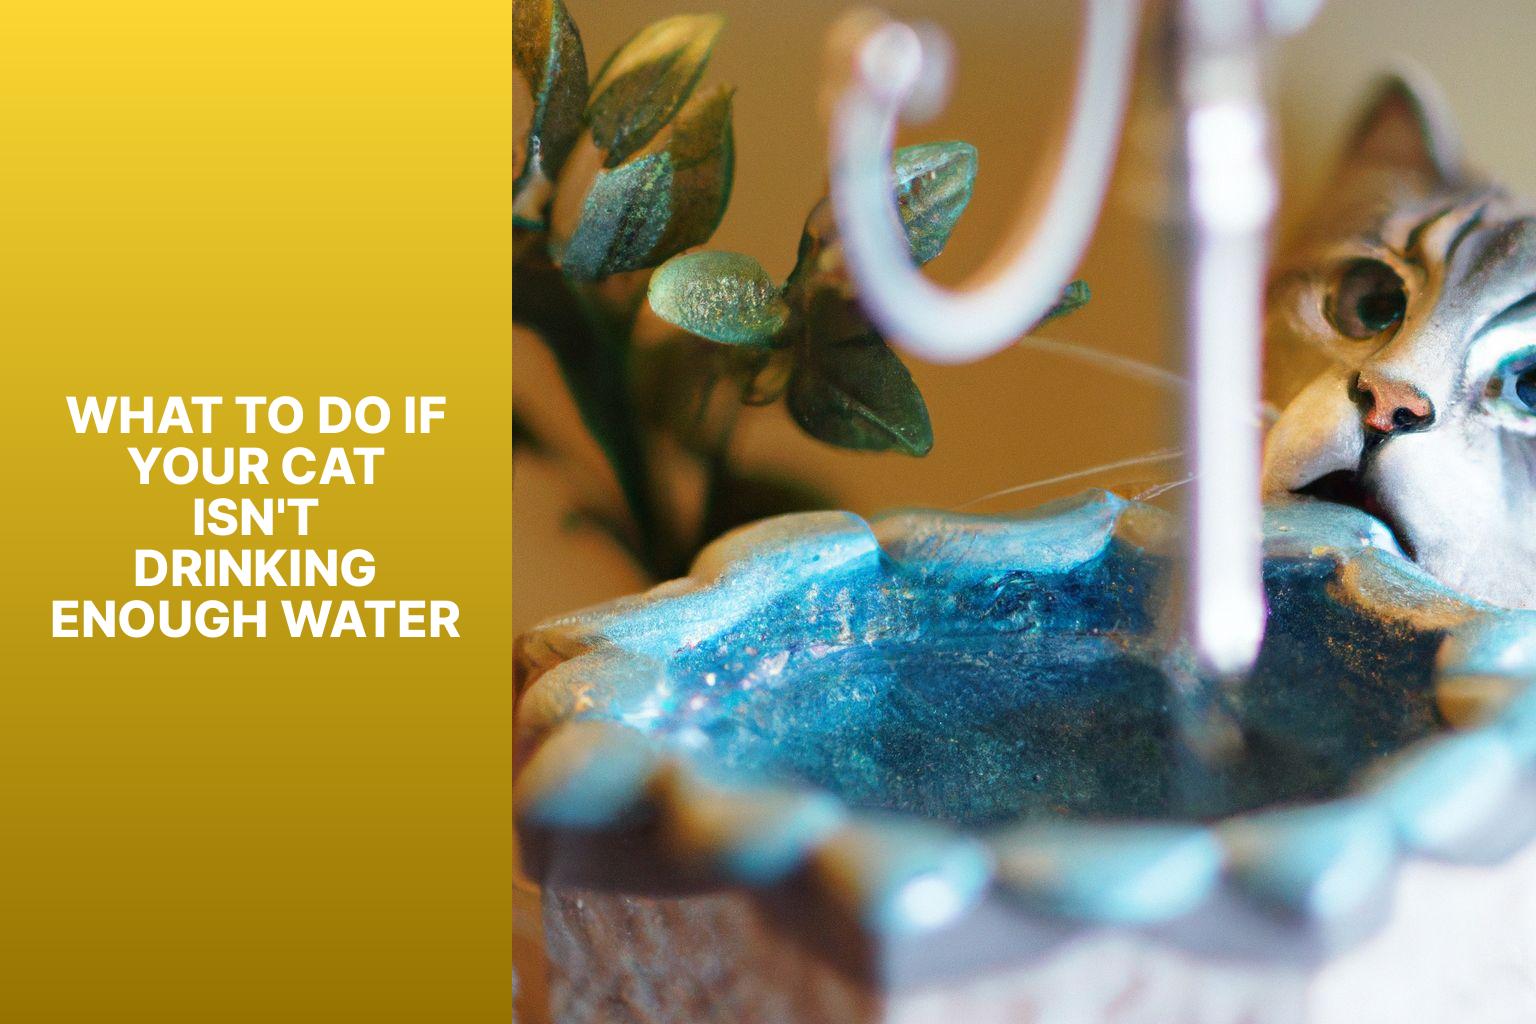 What to Do if Your Cat Isn